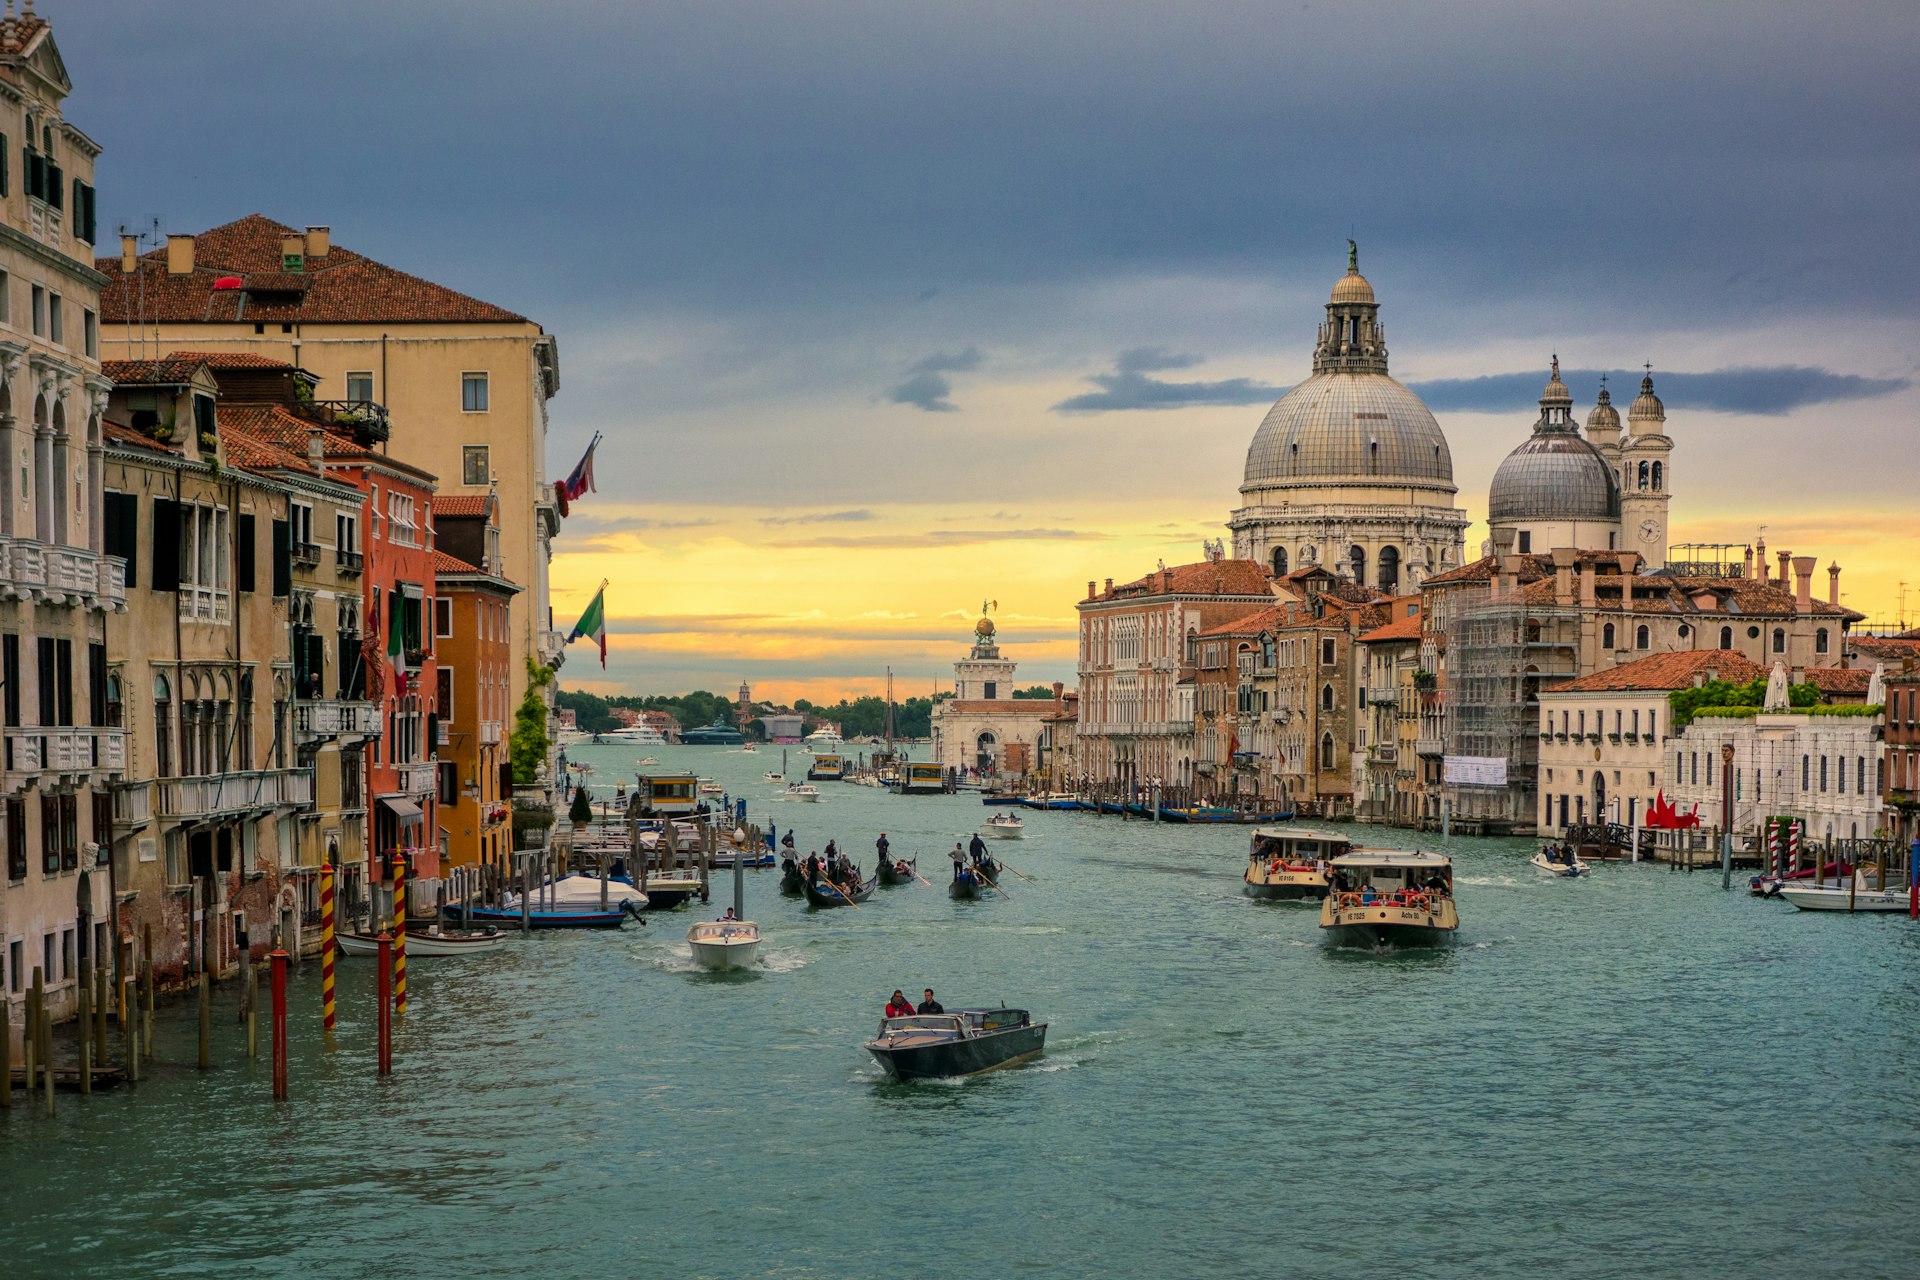 View over the Grand Canal in Venice, Italy